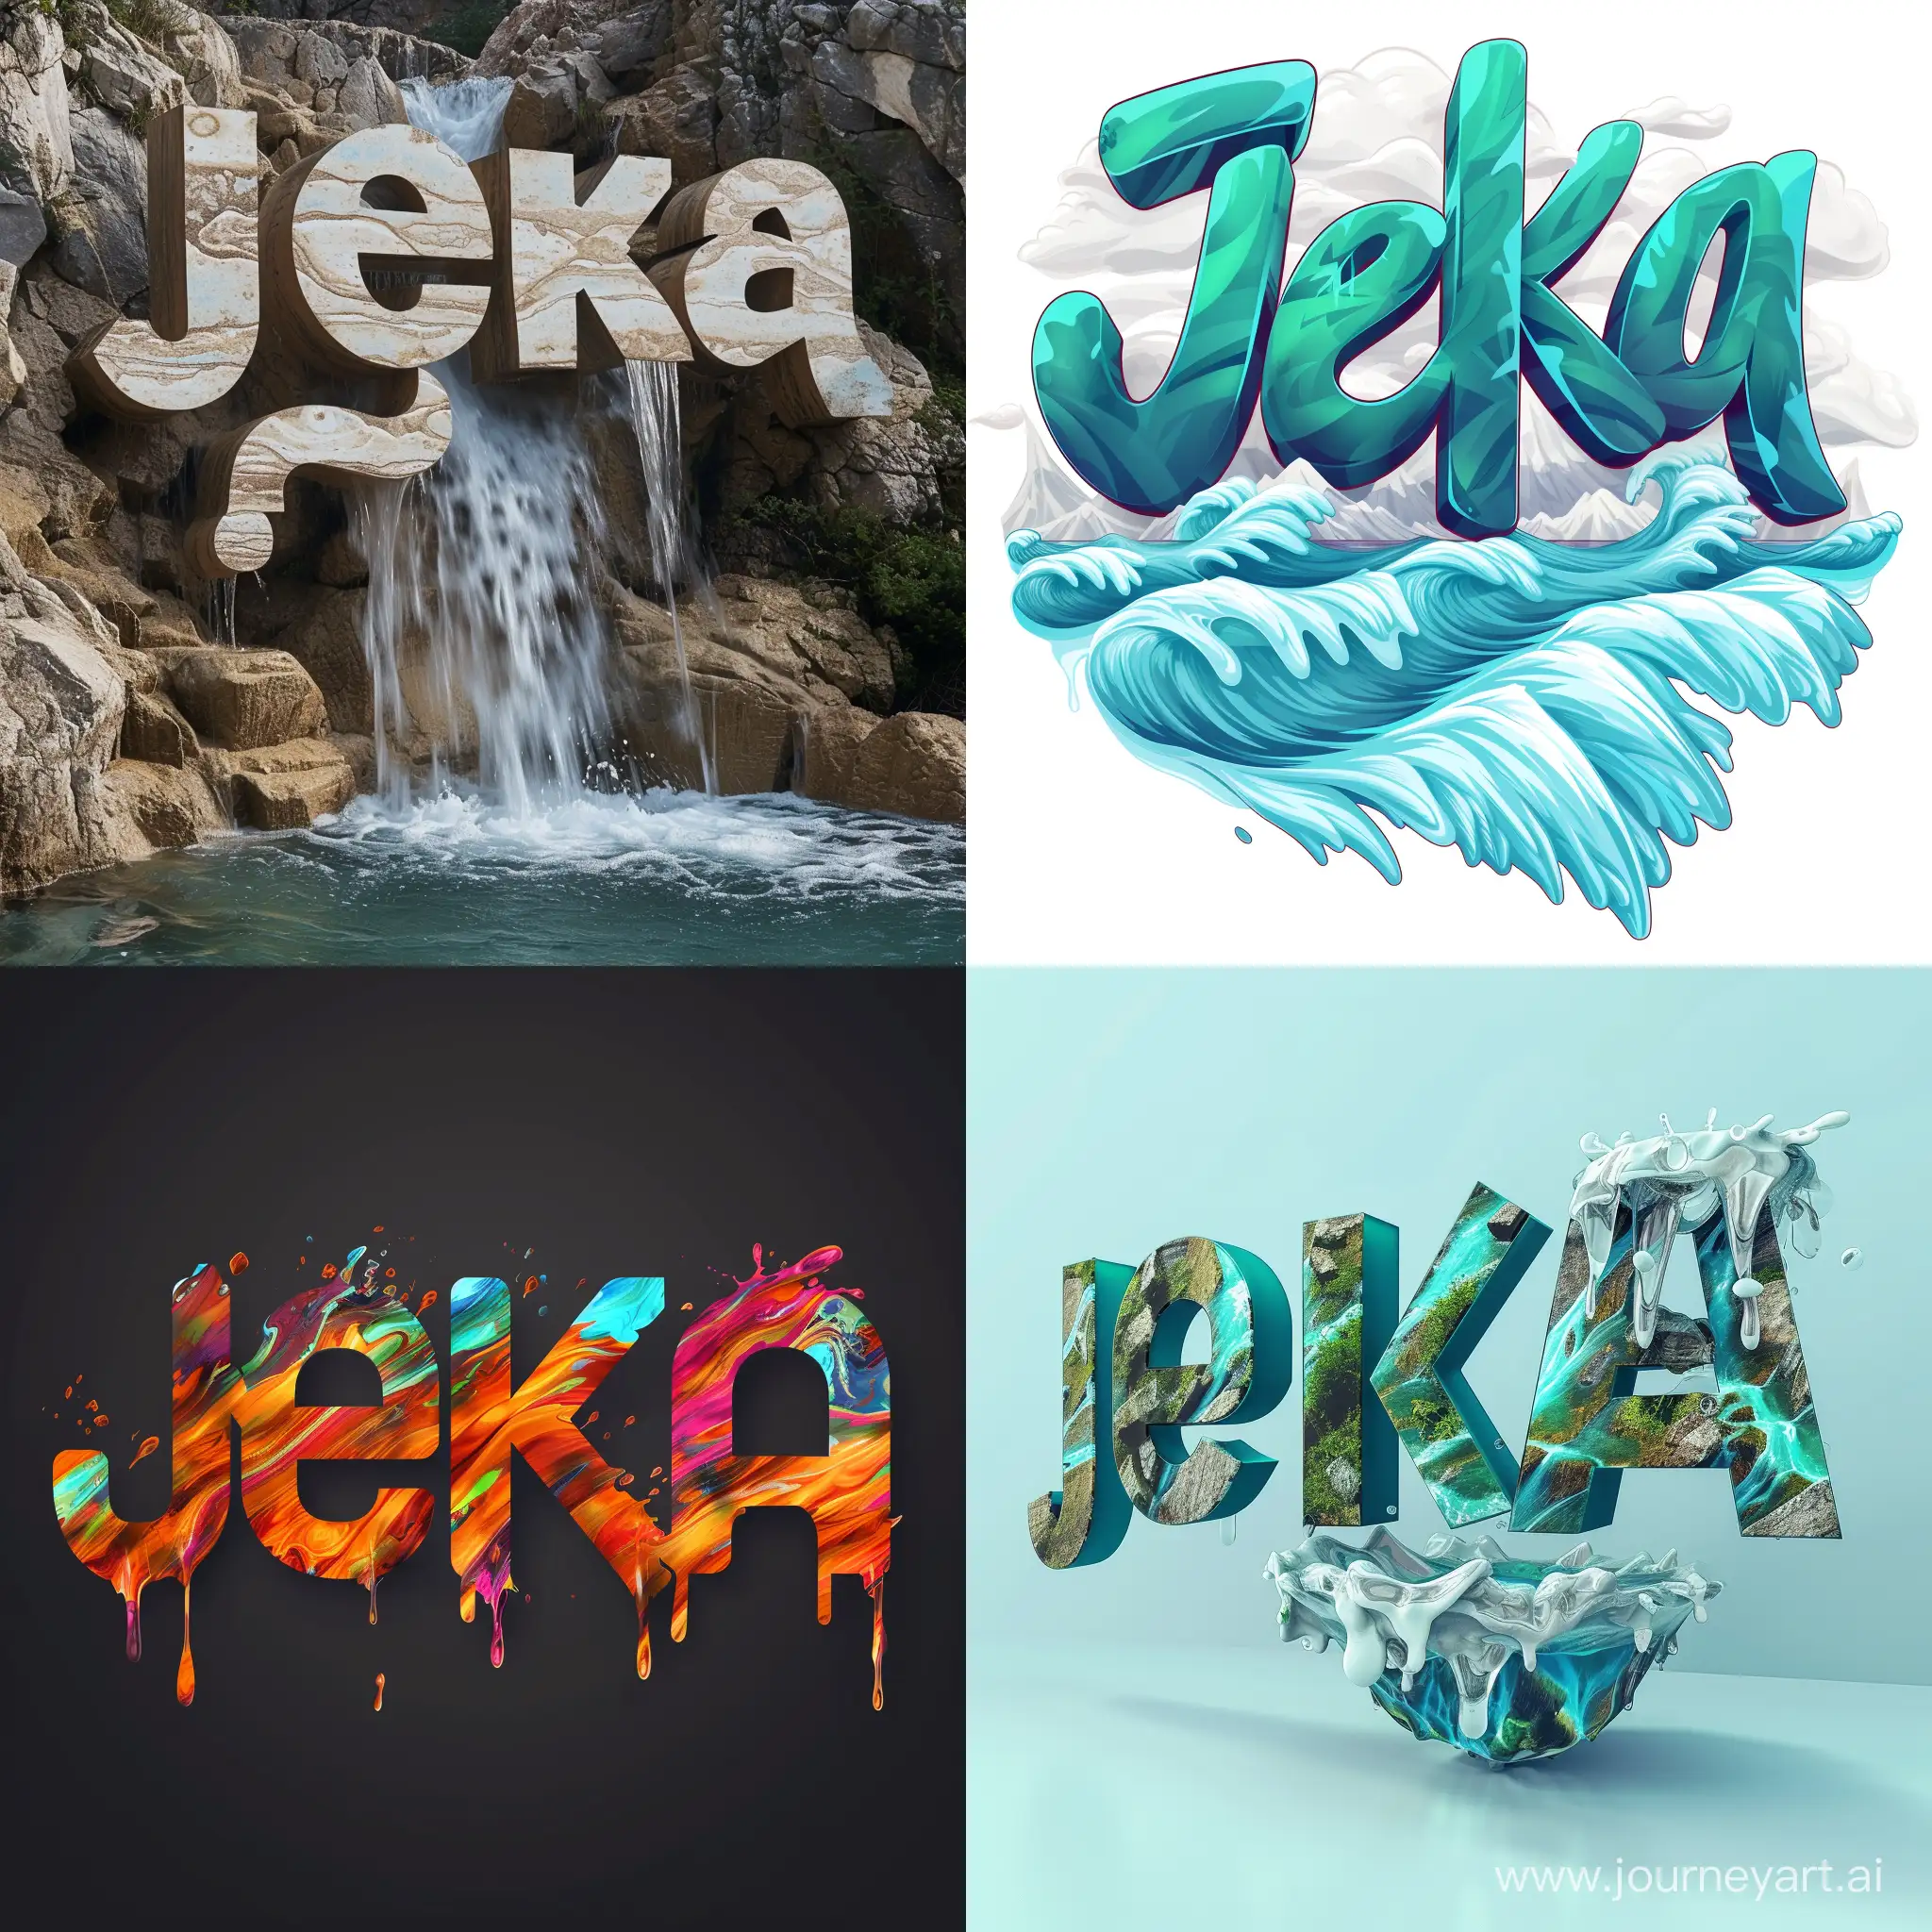 a large image of the word "Jeka", with attractive shape of water font,